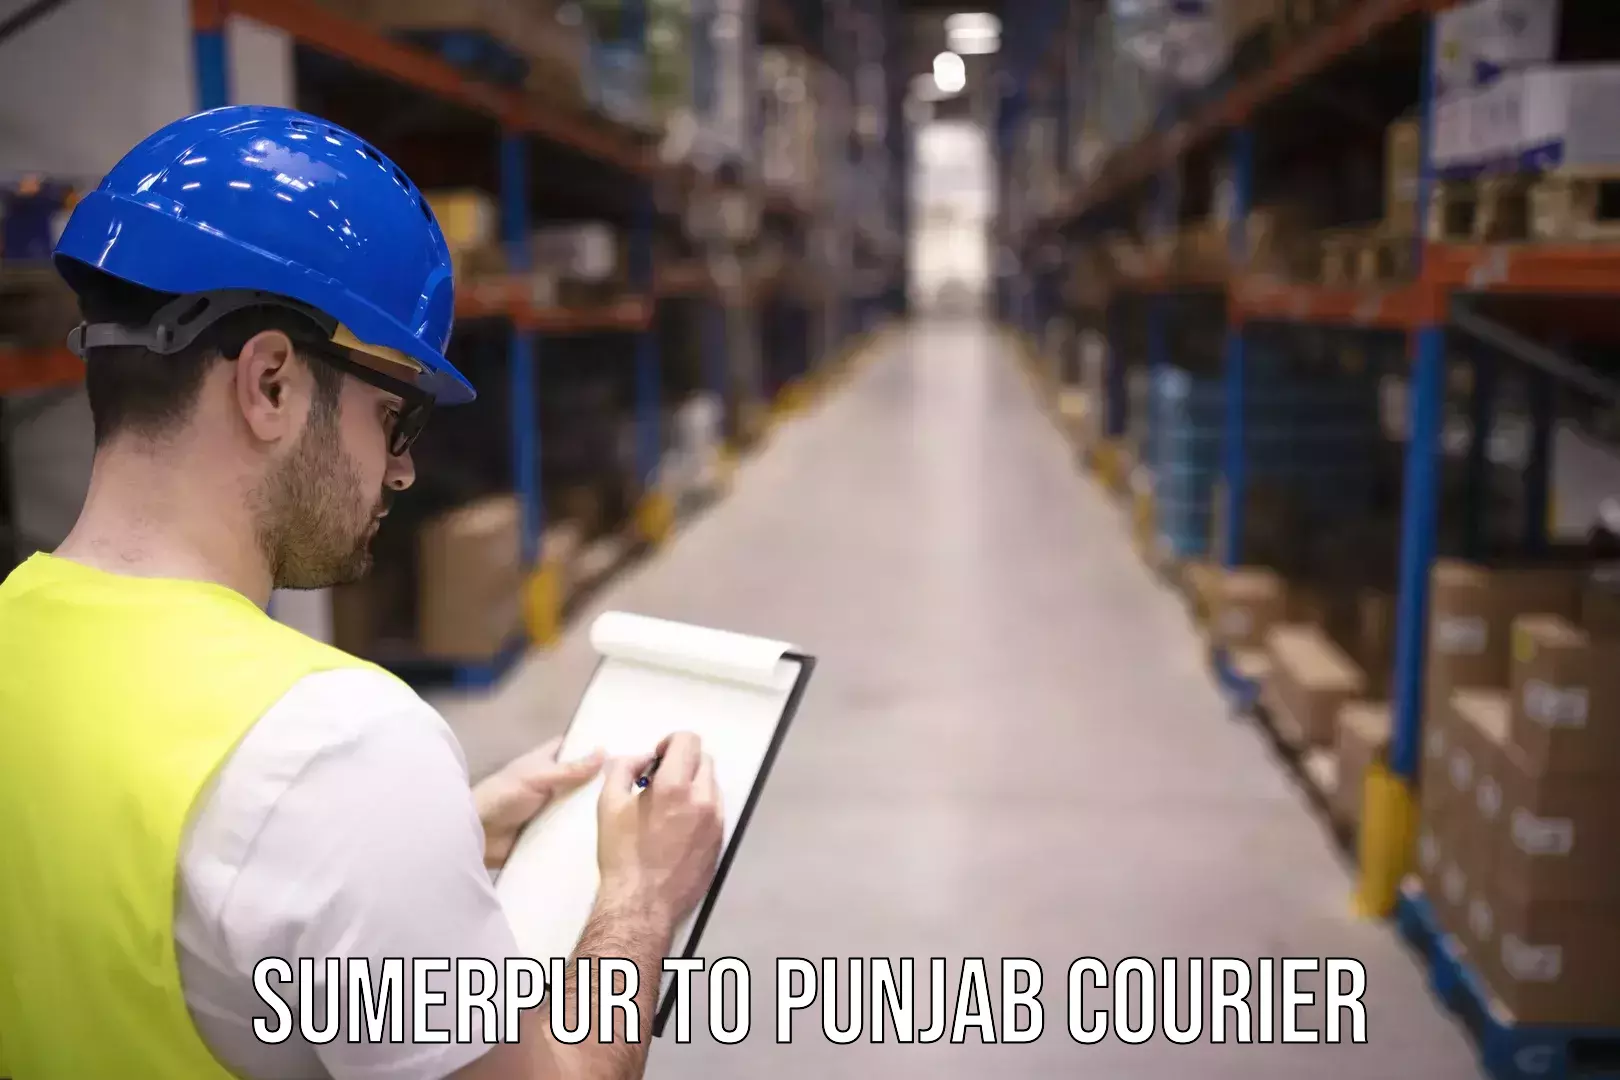 Full-service courier options Sumerpur to Pathankot